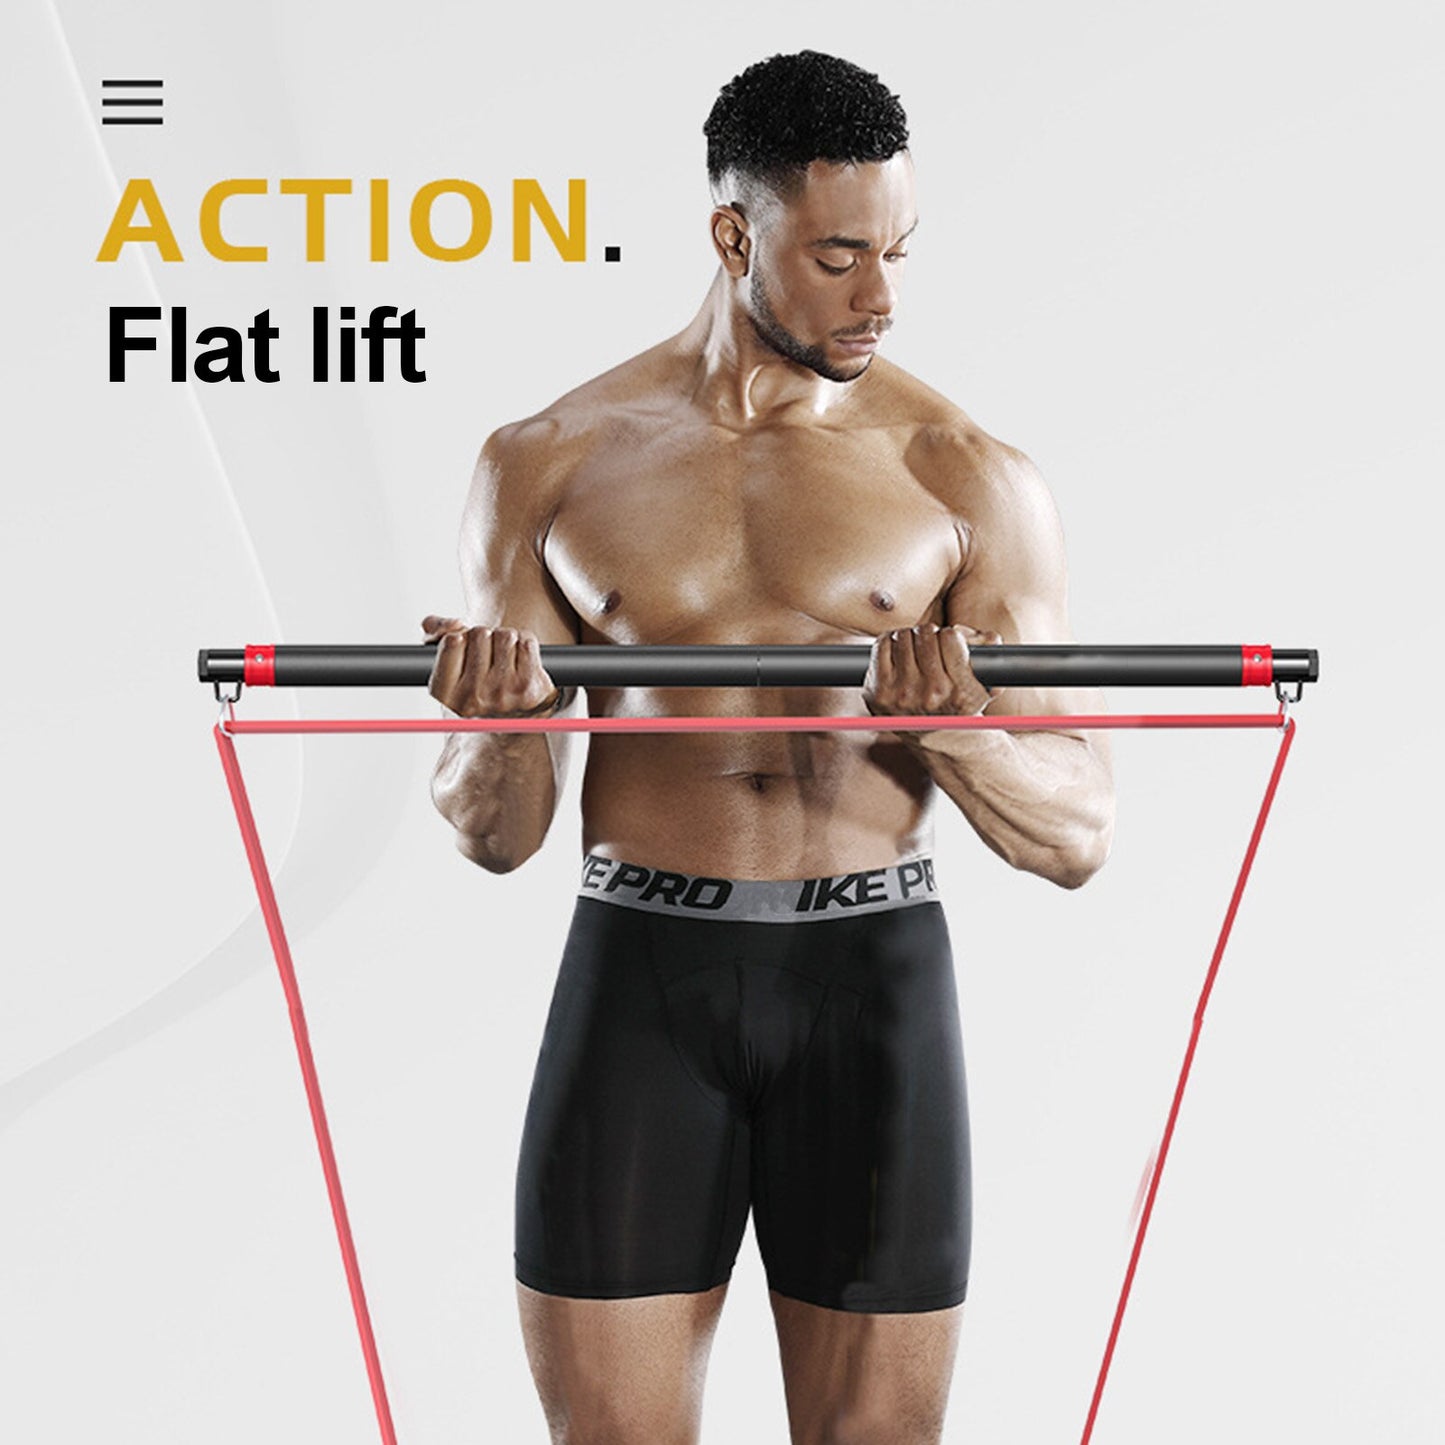 Fitness Elastic Resistance Band Adjustable Home Bench Press Training Bar Chest Muscle Training Training Rod For Home Gym Band